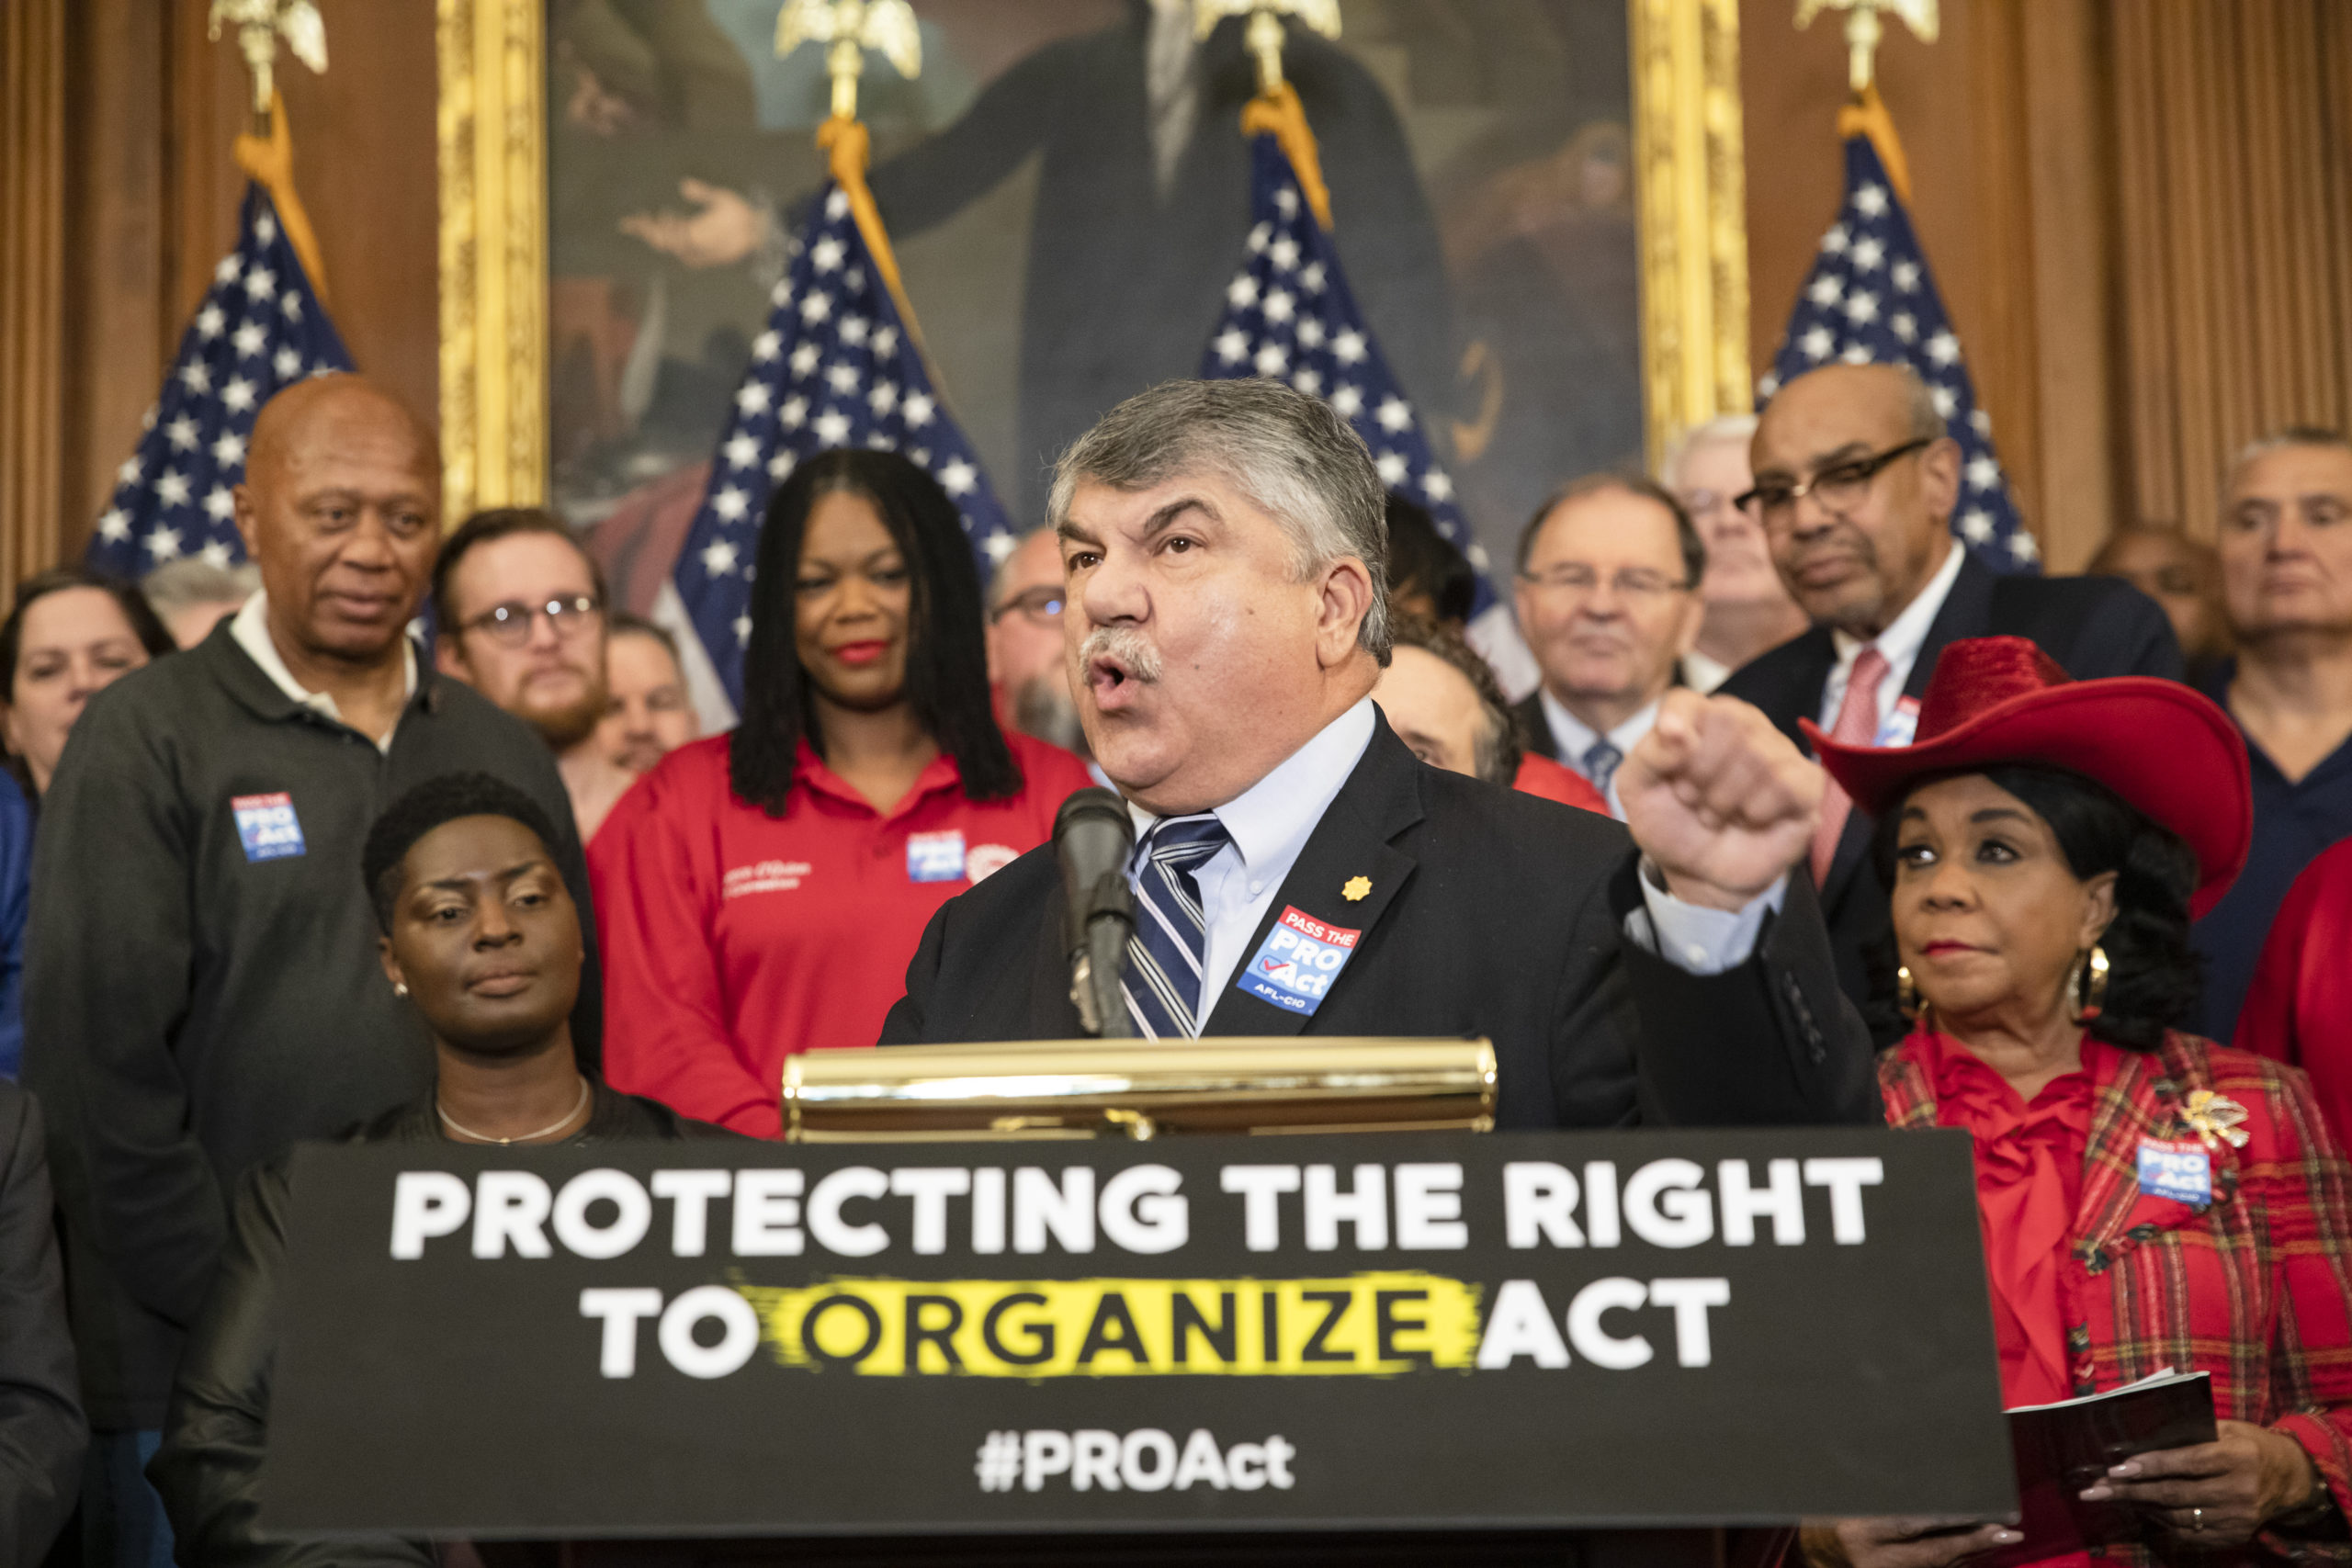 Richard Trumka, President of the AFL-CIO, speaks during a press conference advocating for the passage of the Protecting the Right to Organize Act on Feb. 5 in Washington, D.C. (Samuel Corum/Getty Images)